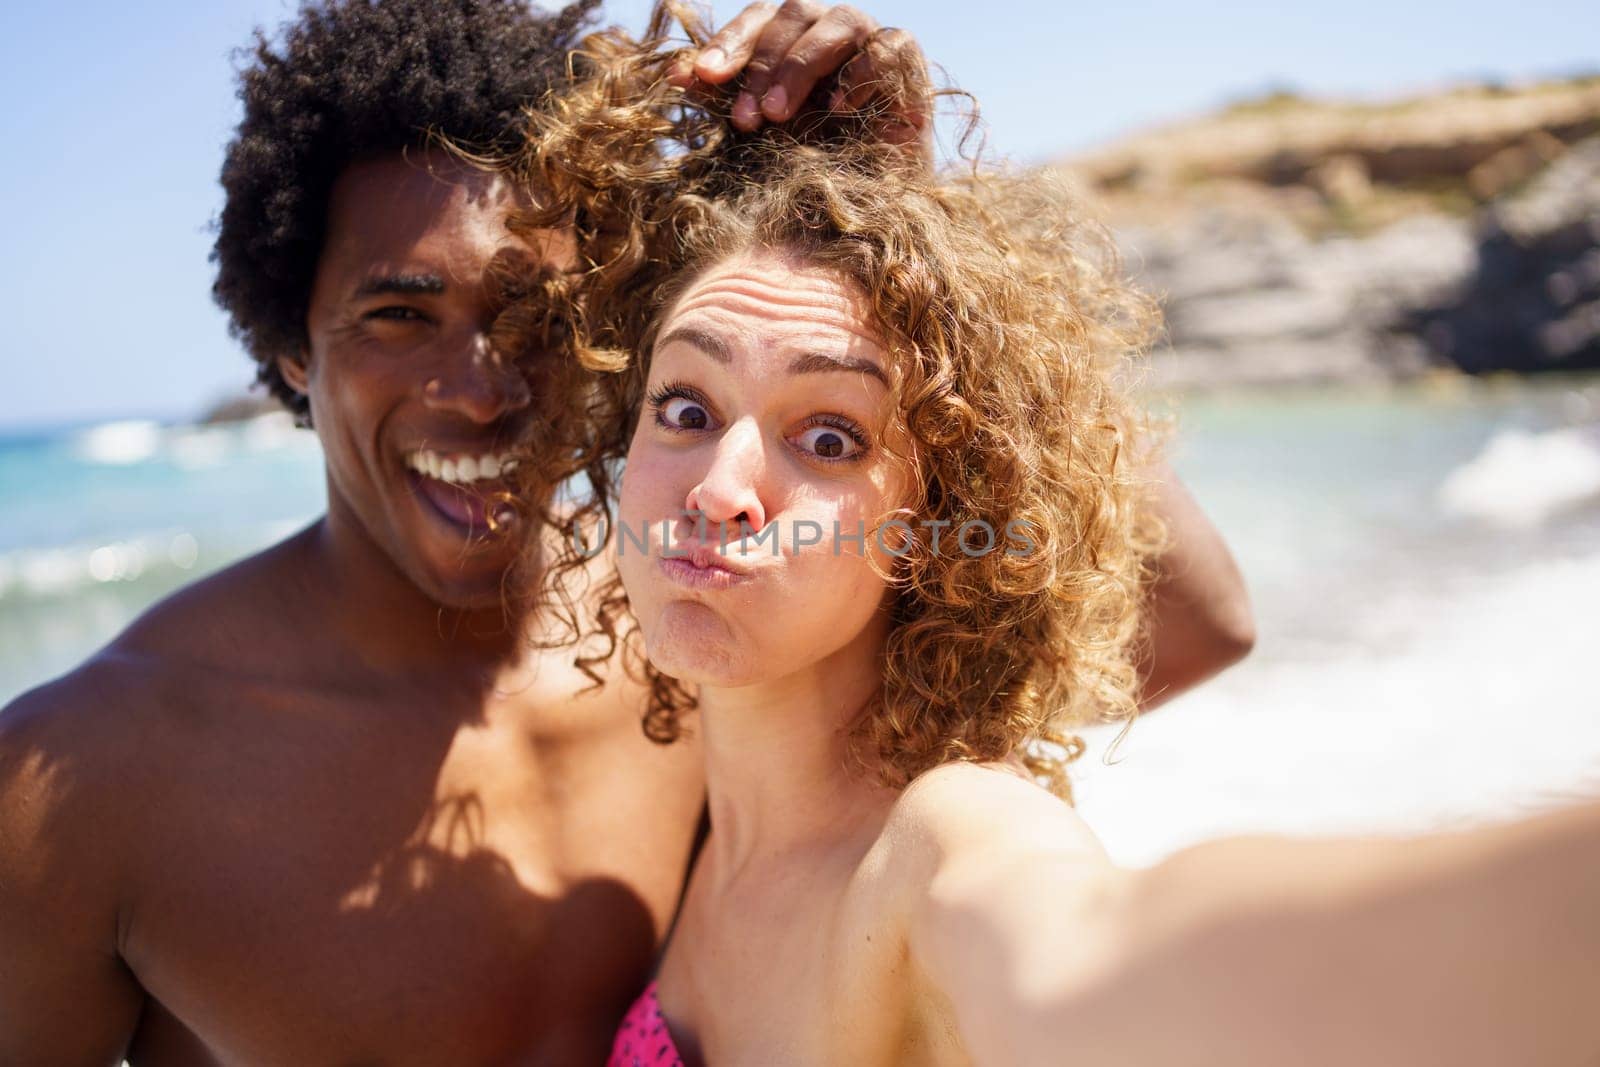 Cheerful young woman with puffed out cheeks taking selfie with black boyfriend touching curly hair of girlfriend while having fun on beach